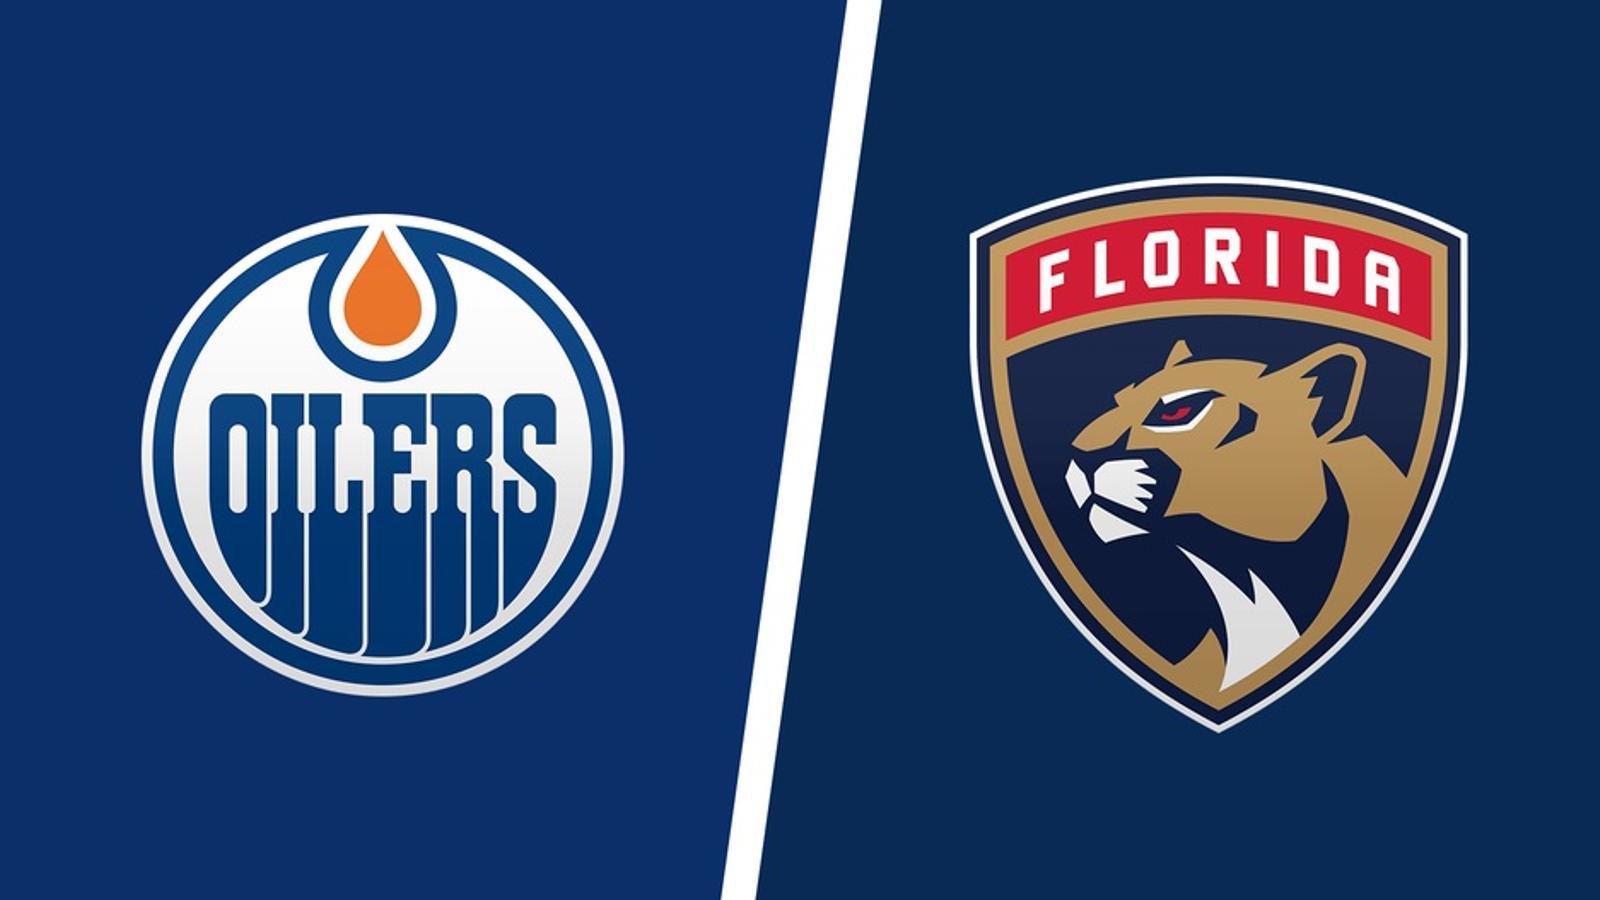 Price difference for tickets in Edmonton vs. Florida for the 2nd round is just ridiculous!